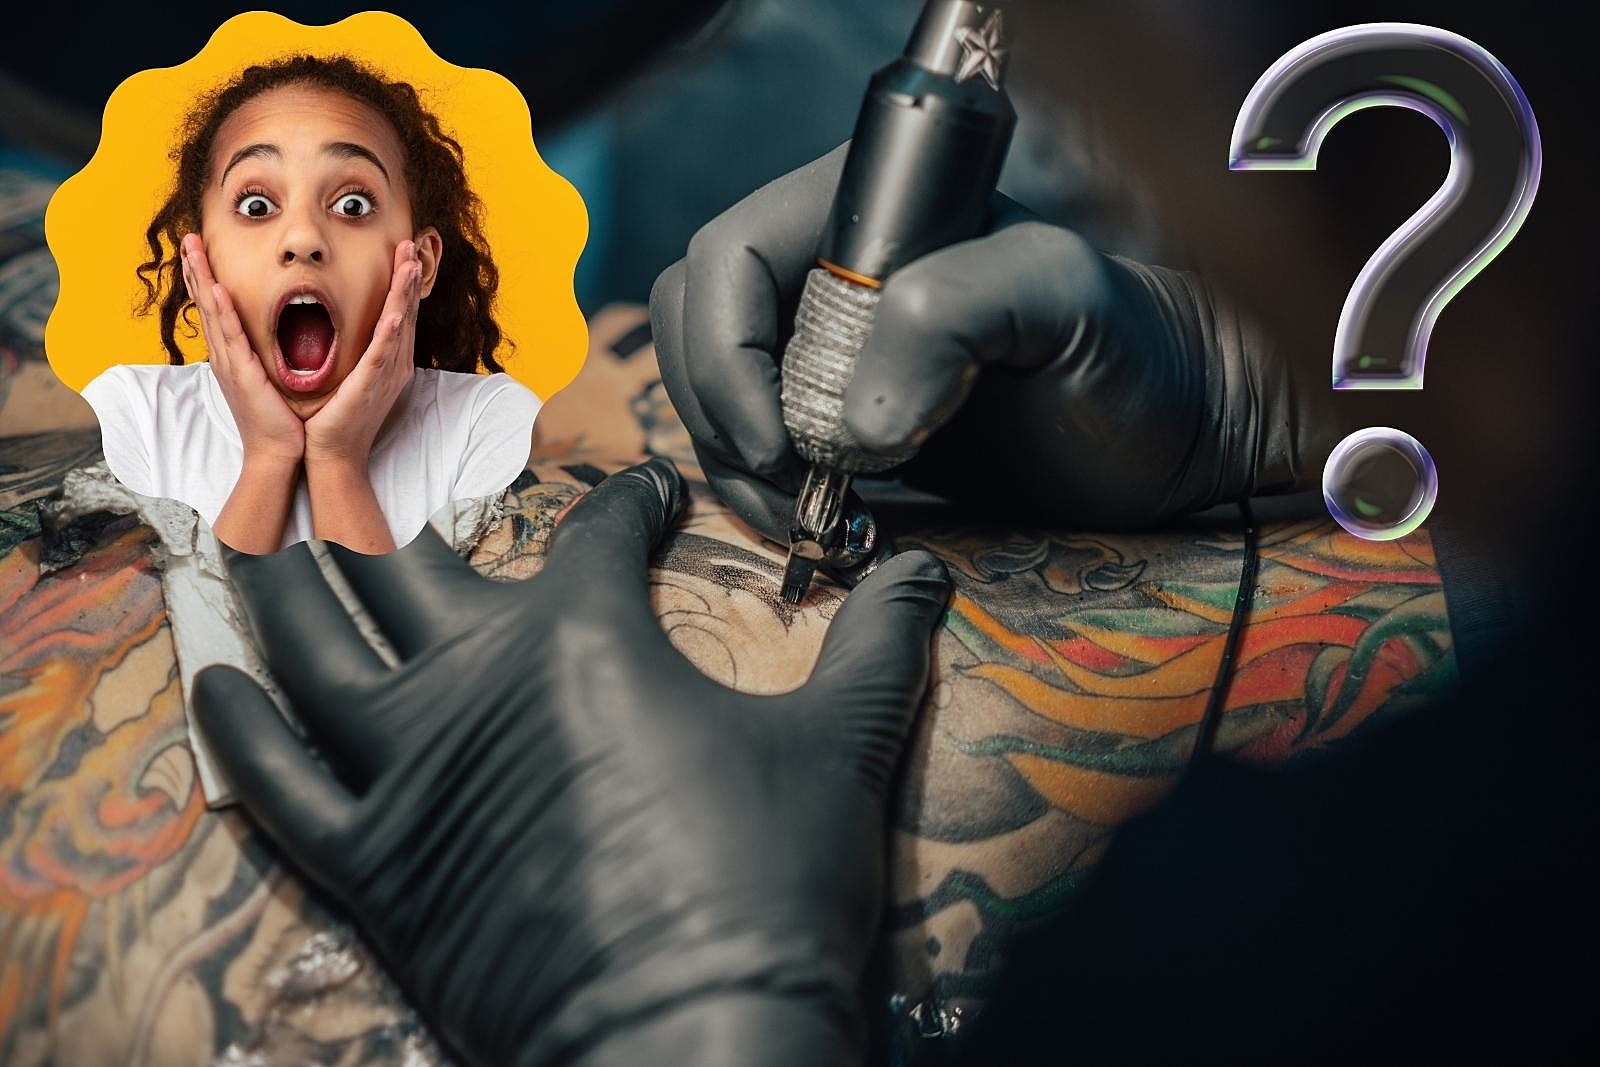 Tattoos Concerns: Should You Let Your Teenager Get A Tattoo?